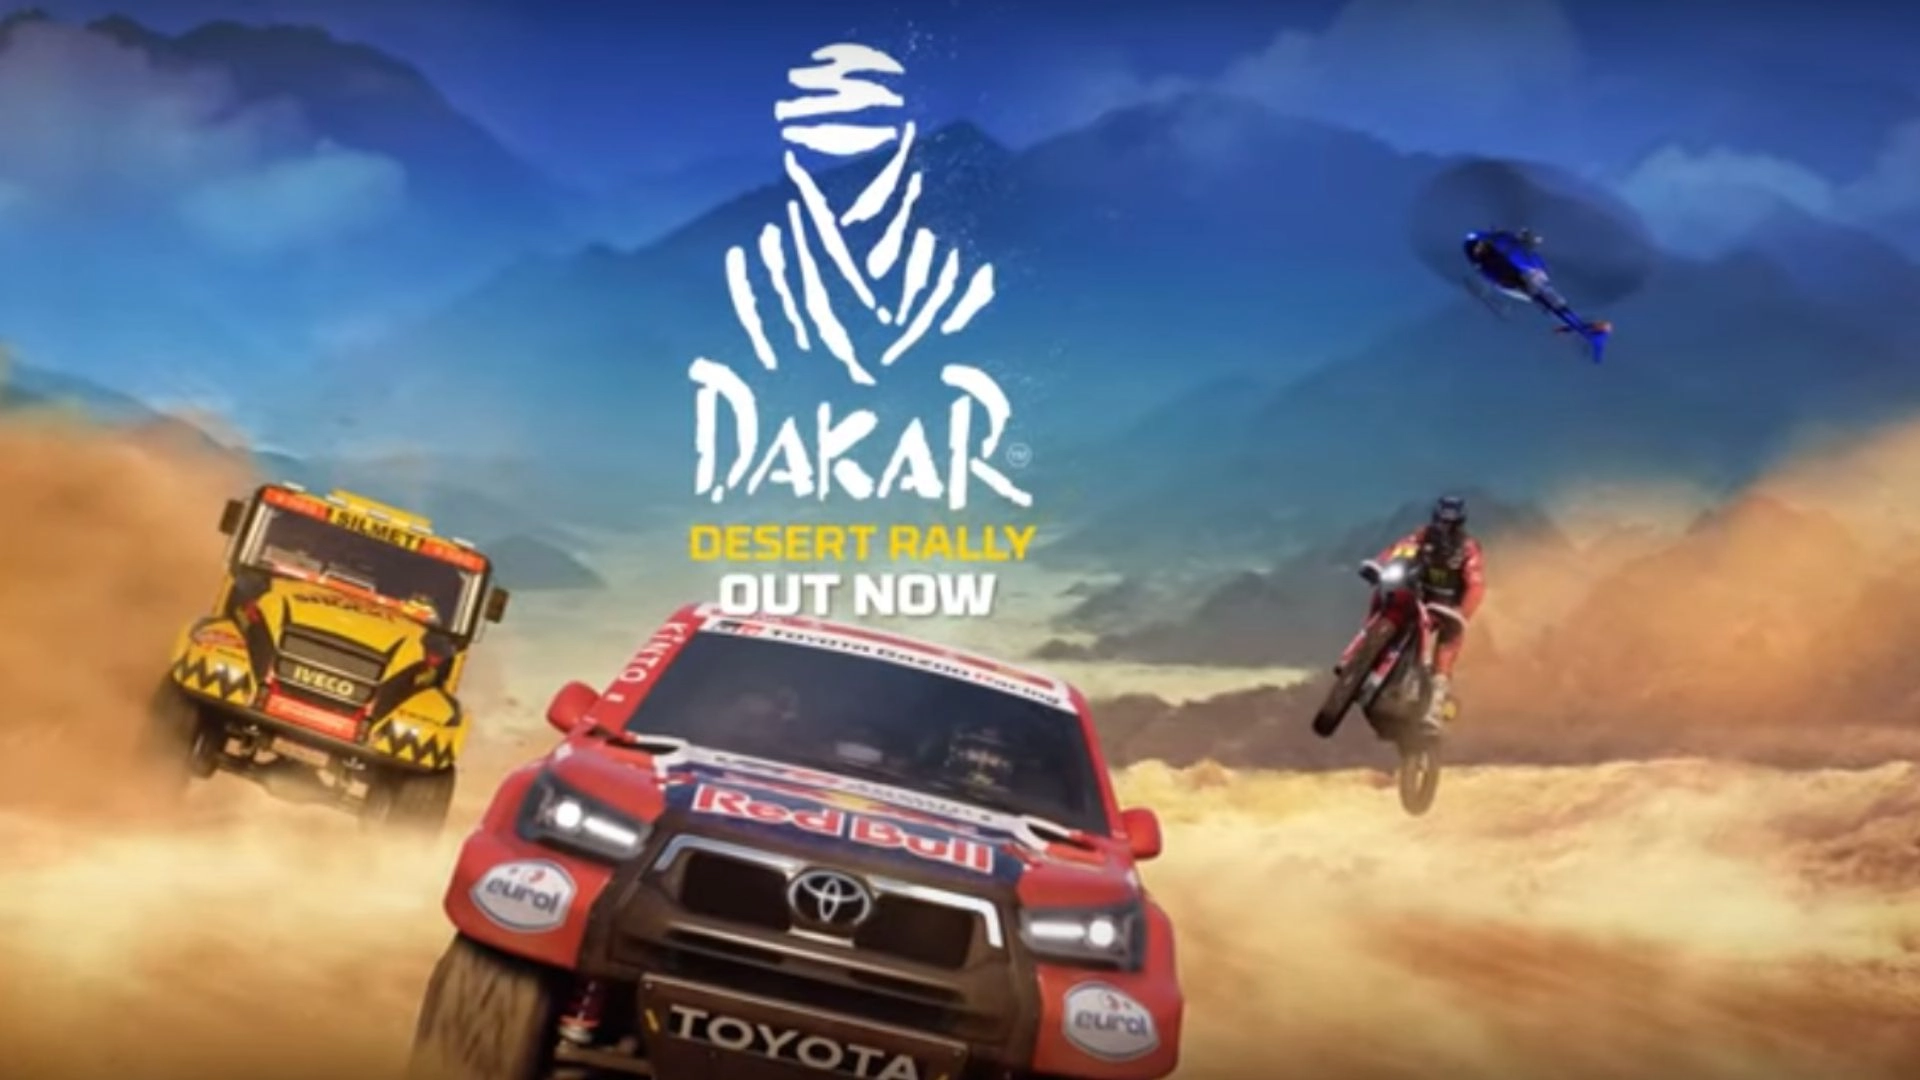 Dakar Desert Rally Parents Guide and Age Rating (2022)